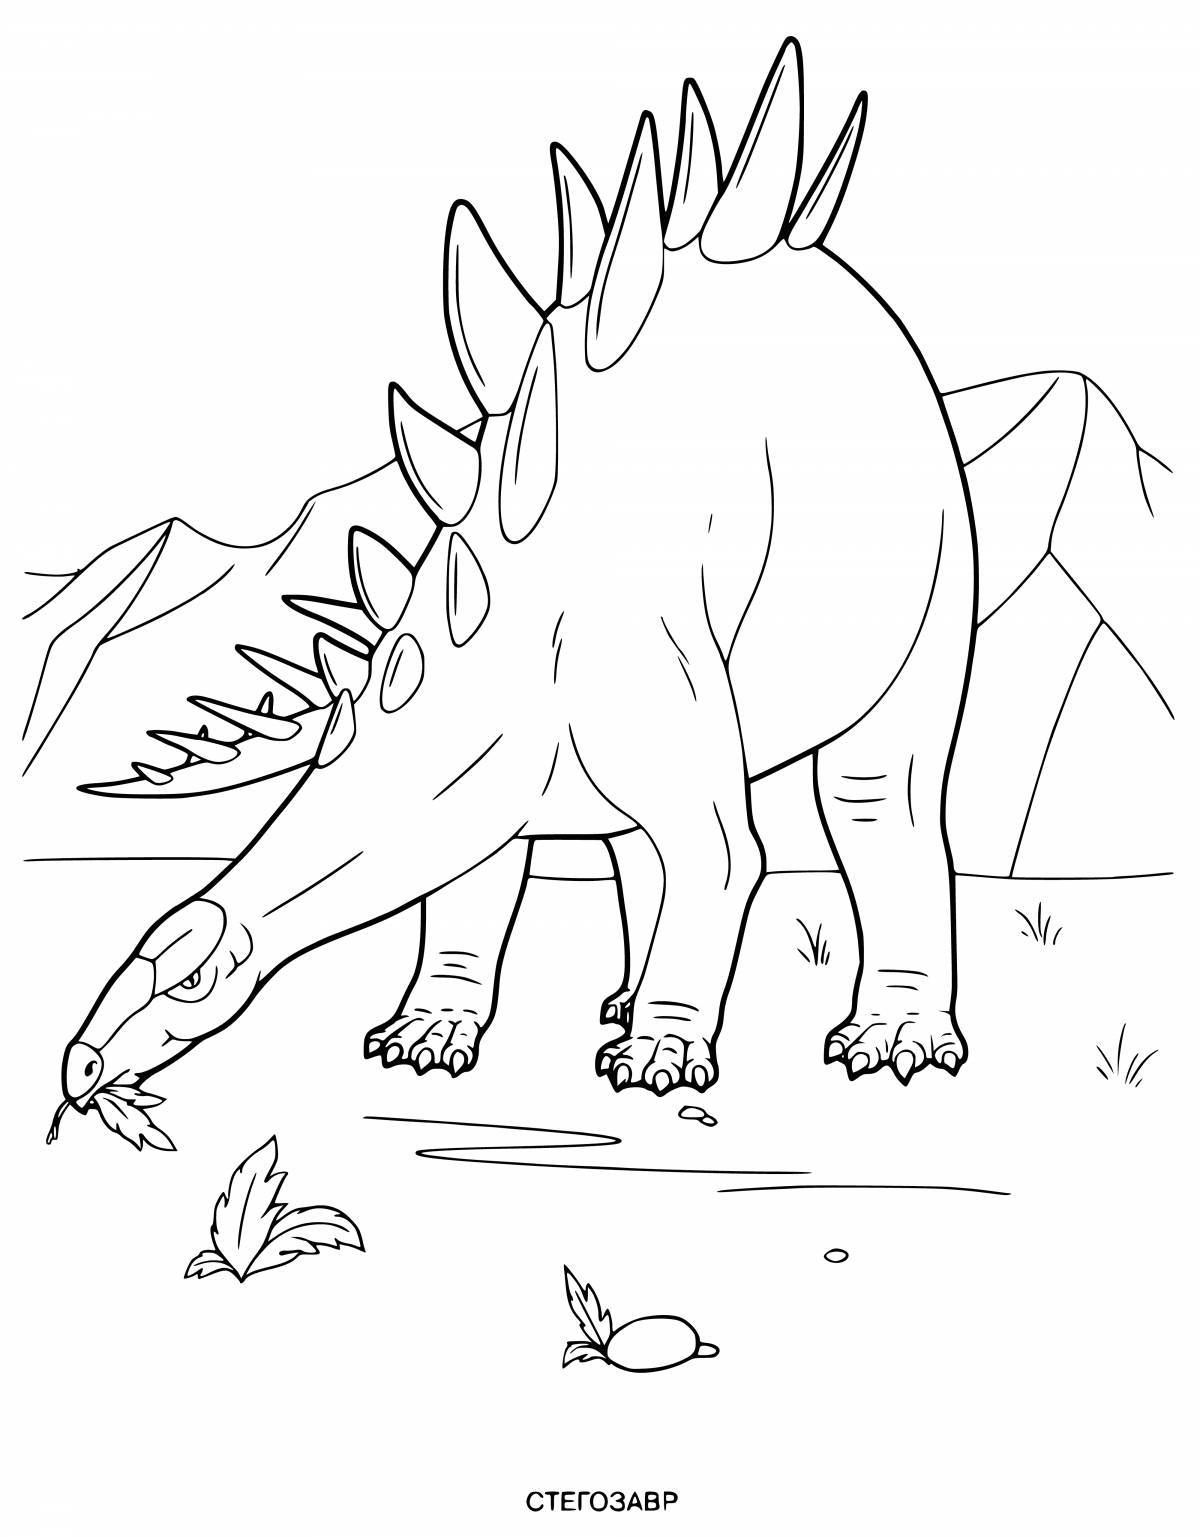 Colorful stegosaurus coloring page